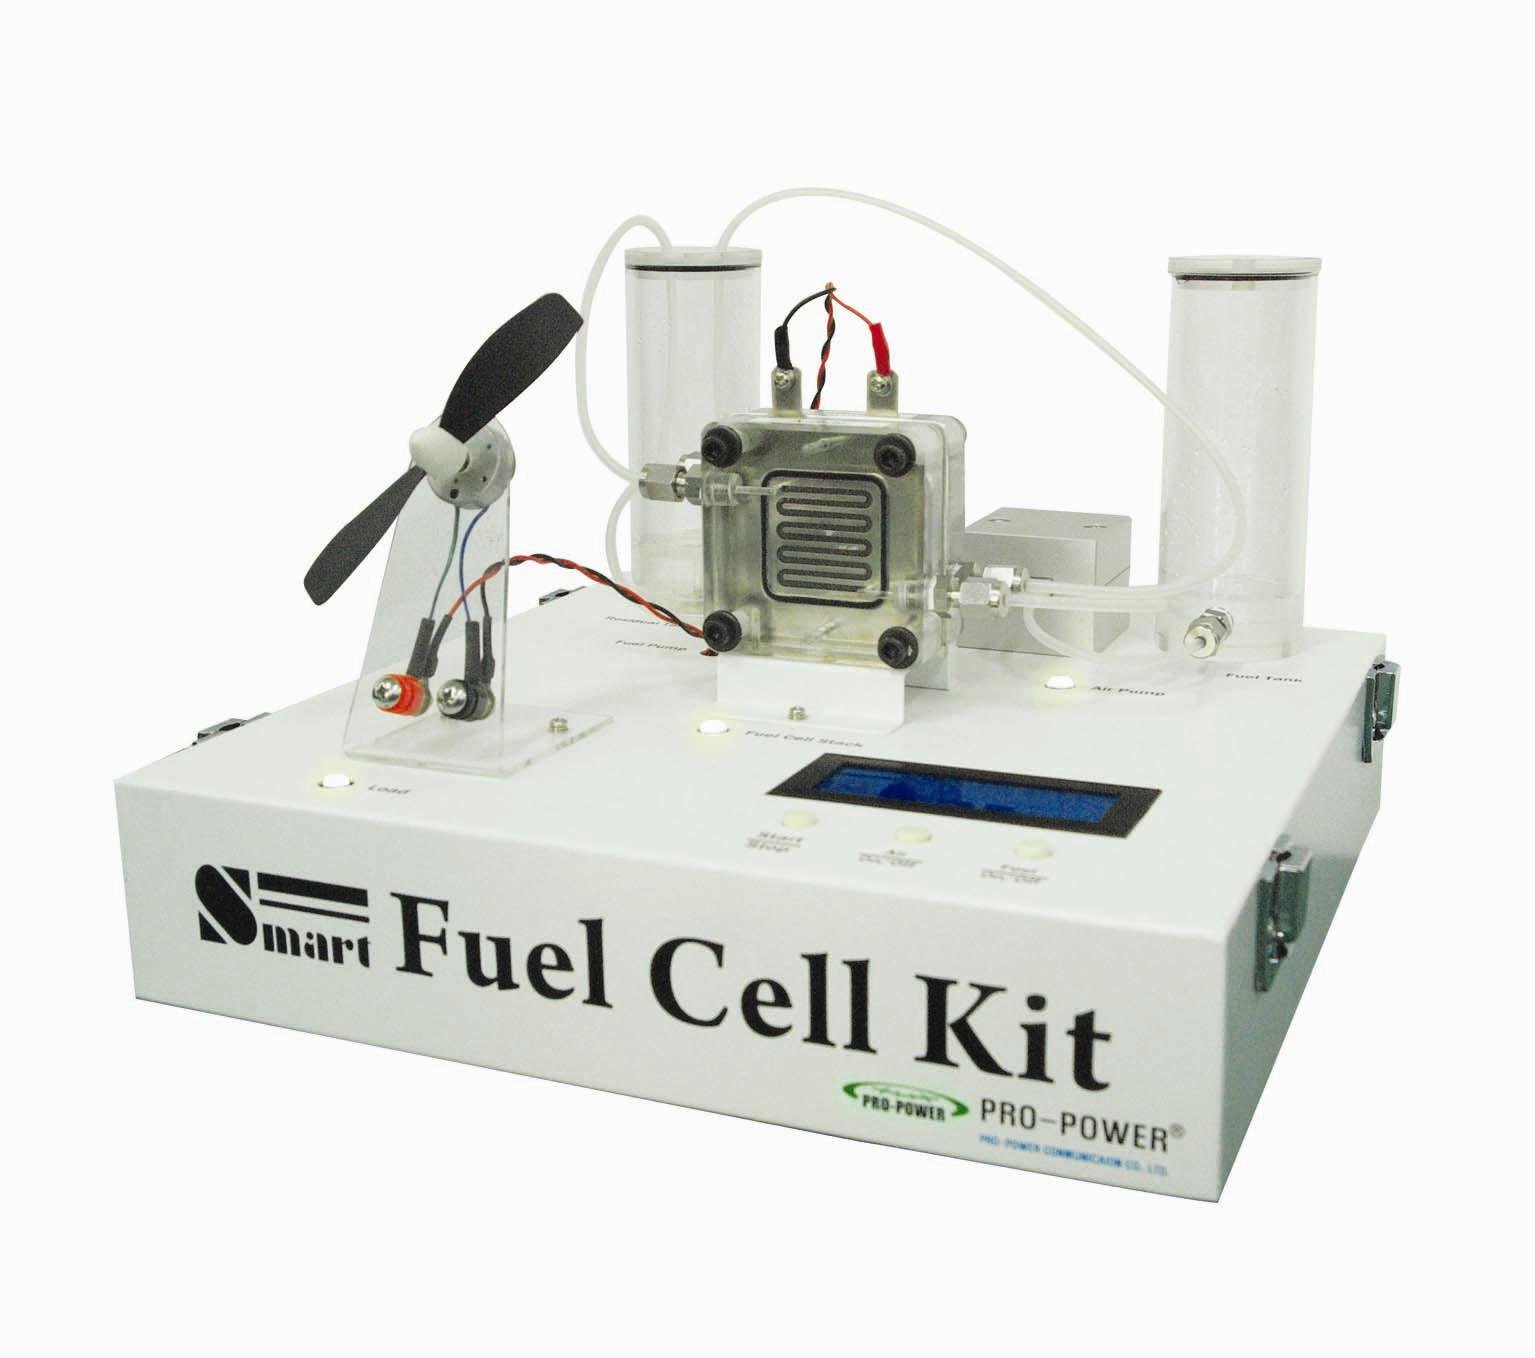 Smart Fuel Cell Kit Made in Korea